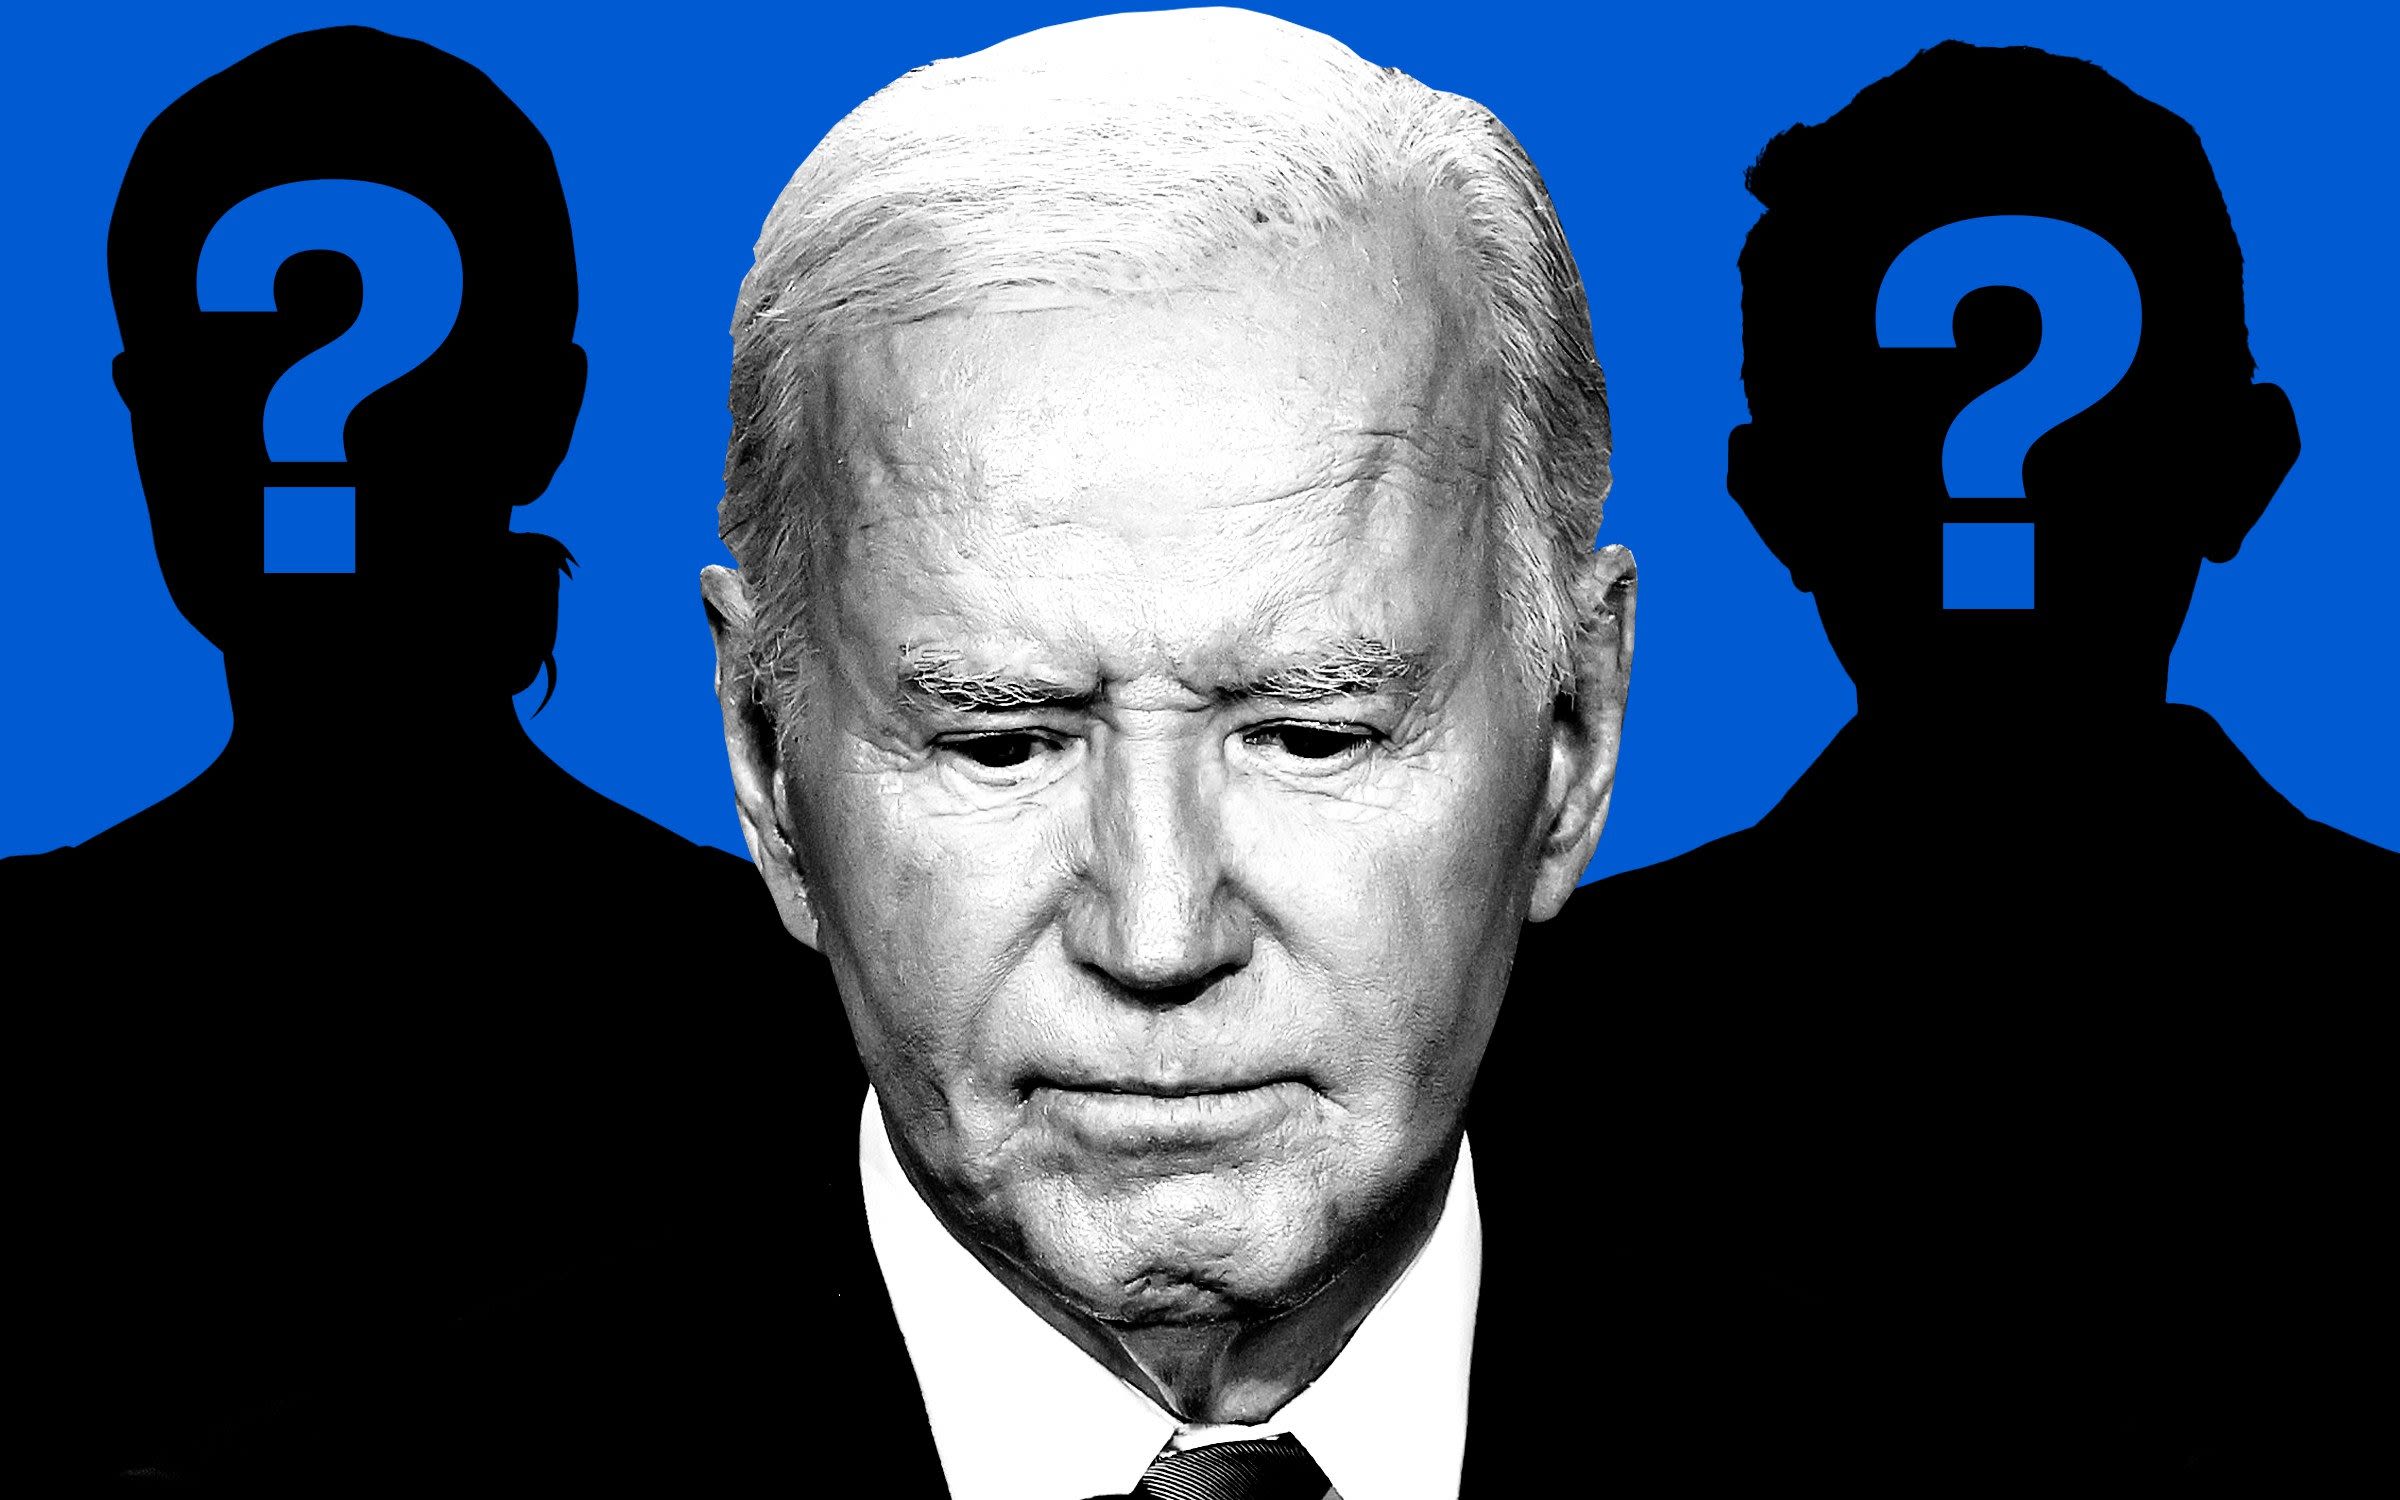 All the Democrats who have called on Joe Biden to quit